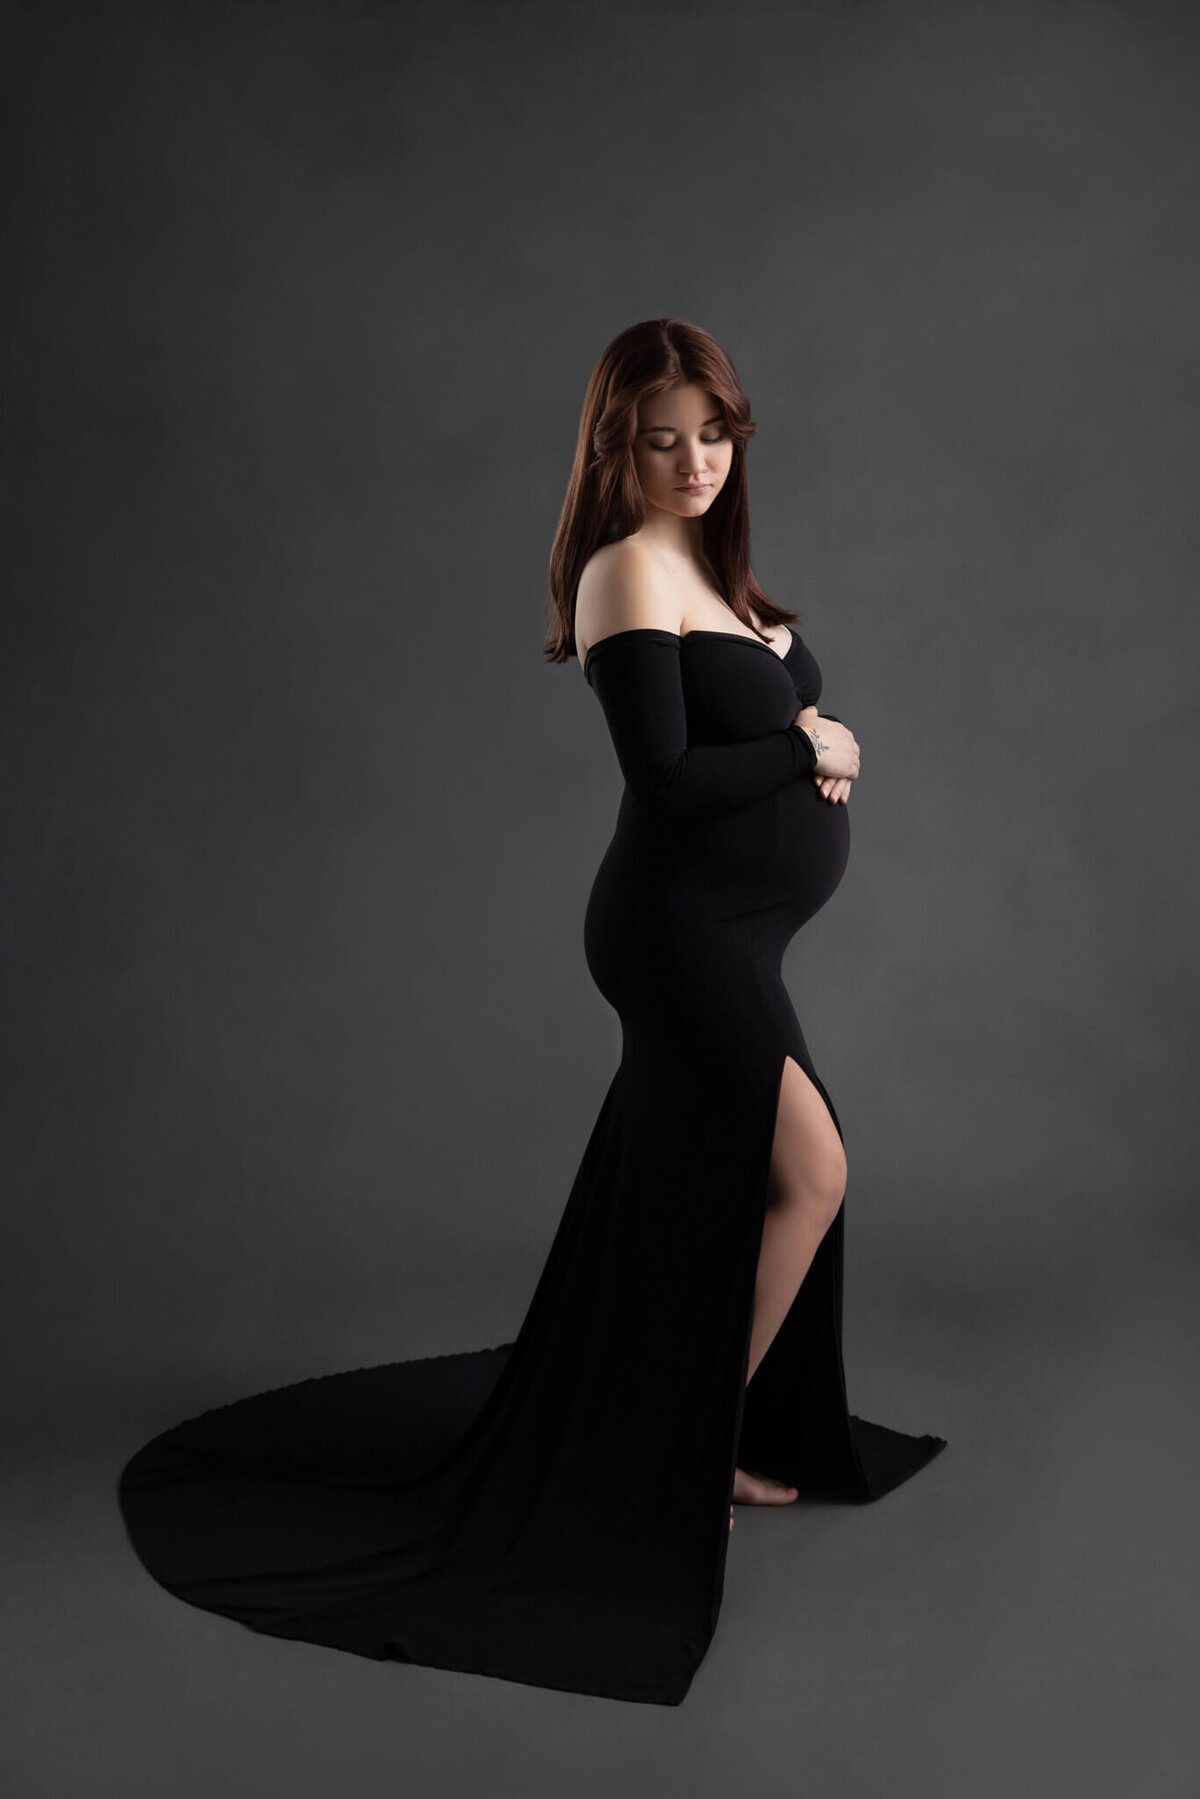 preagnant woman in a black dress with her hands on top of her belly